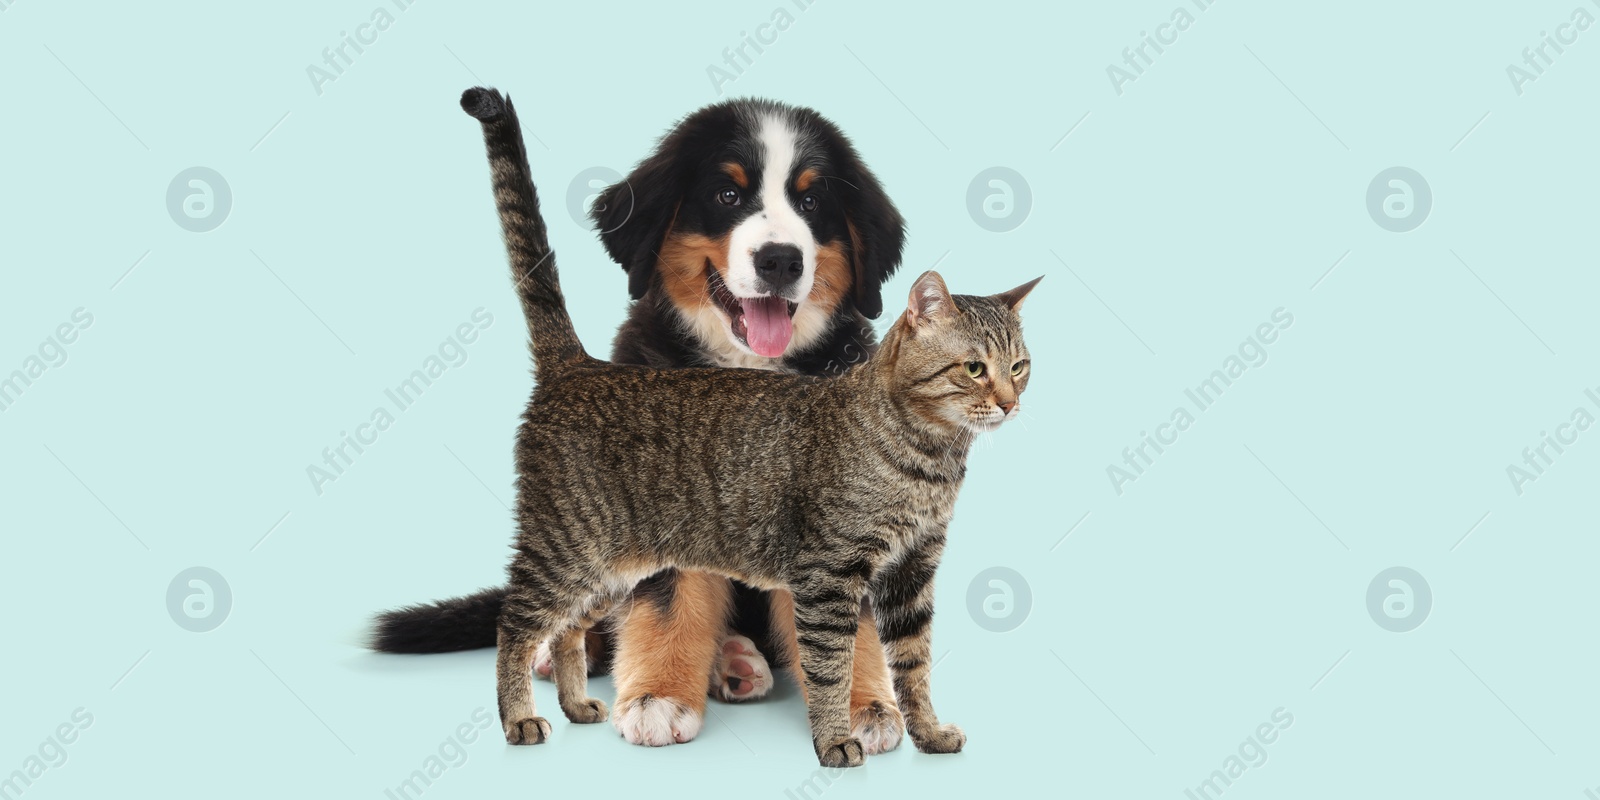 Image of Happy pets. Cute tabby cat standing near Bernese Mountain Dog puppy on pale light blue background, banner design